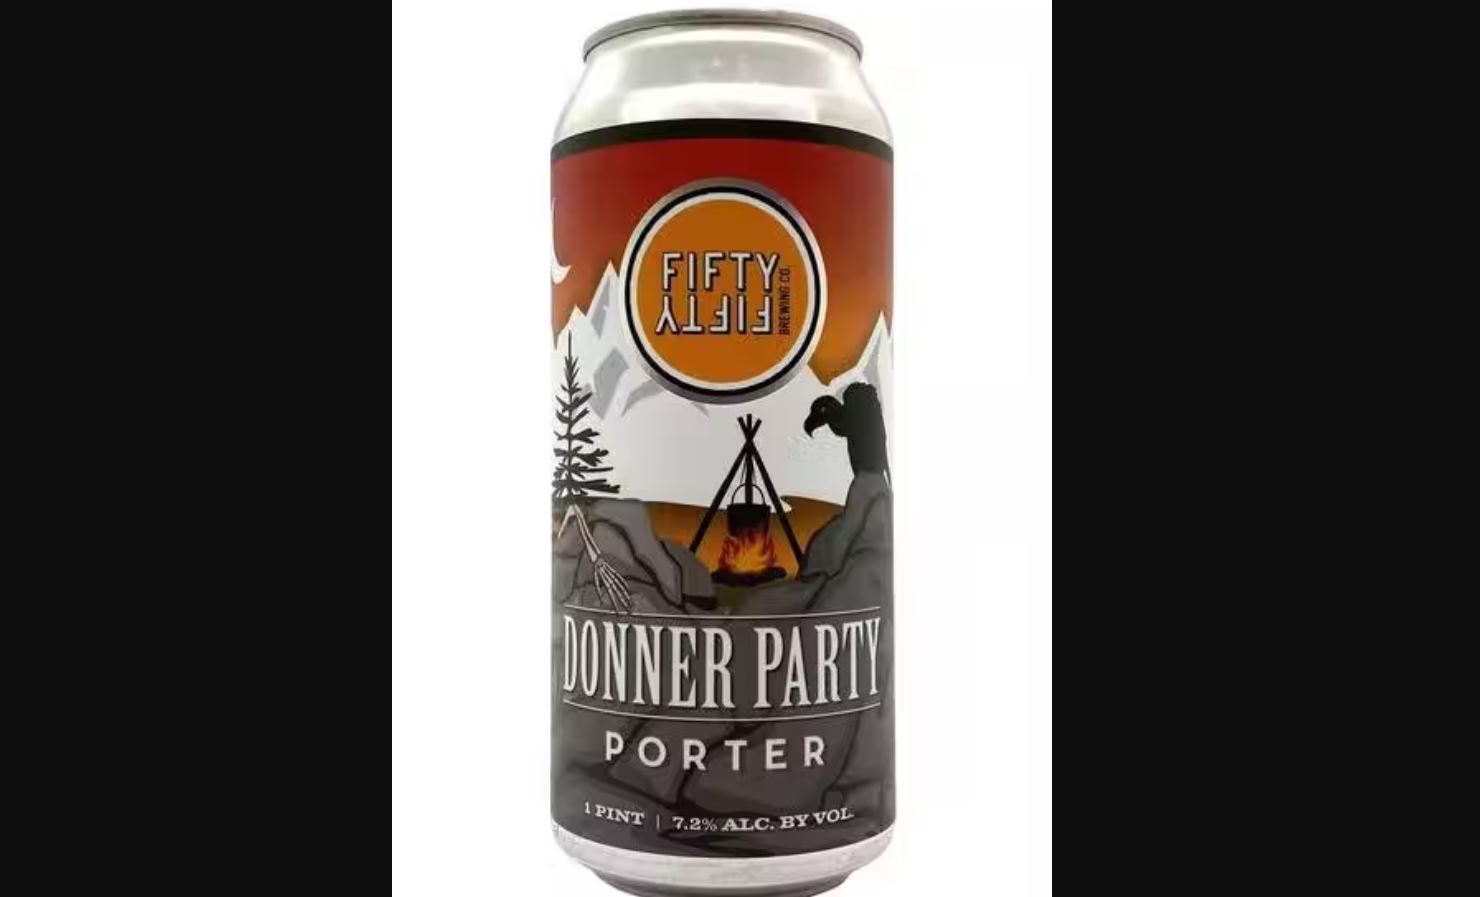 Fifty Fifty Donner Party